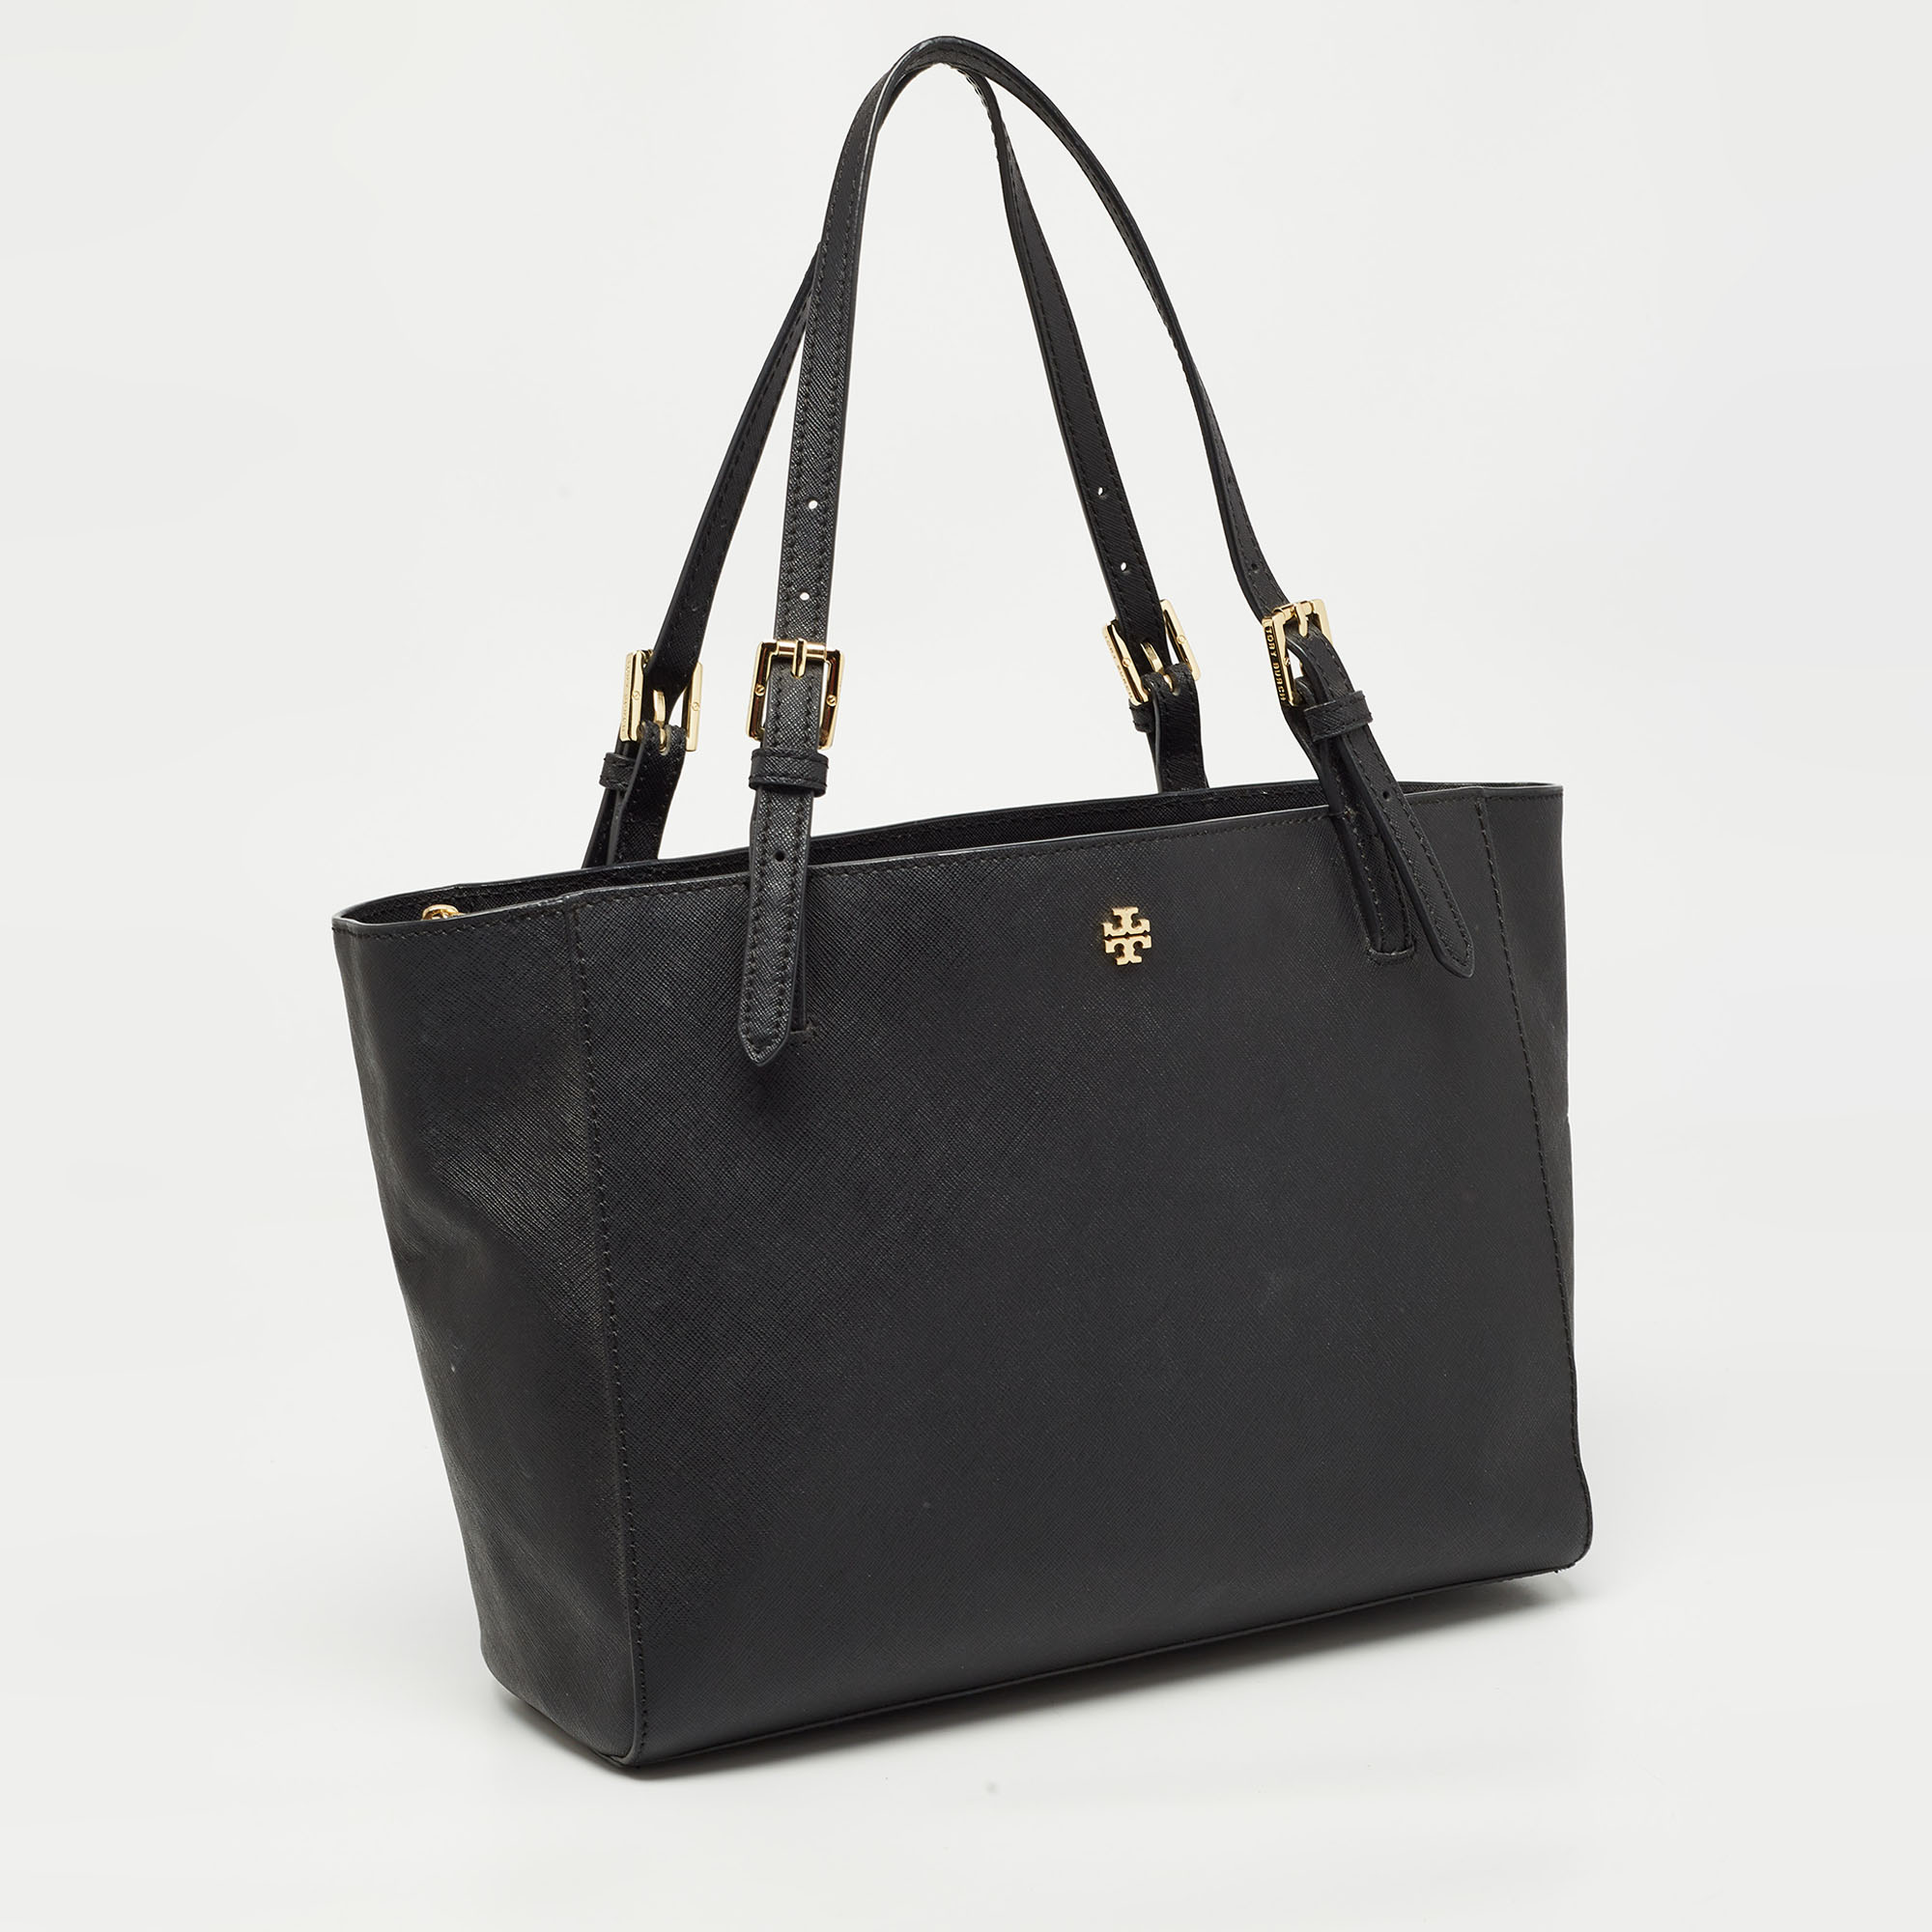 Tory Burch Black Saffiano Leather York Buckle Tote